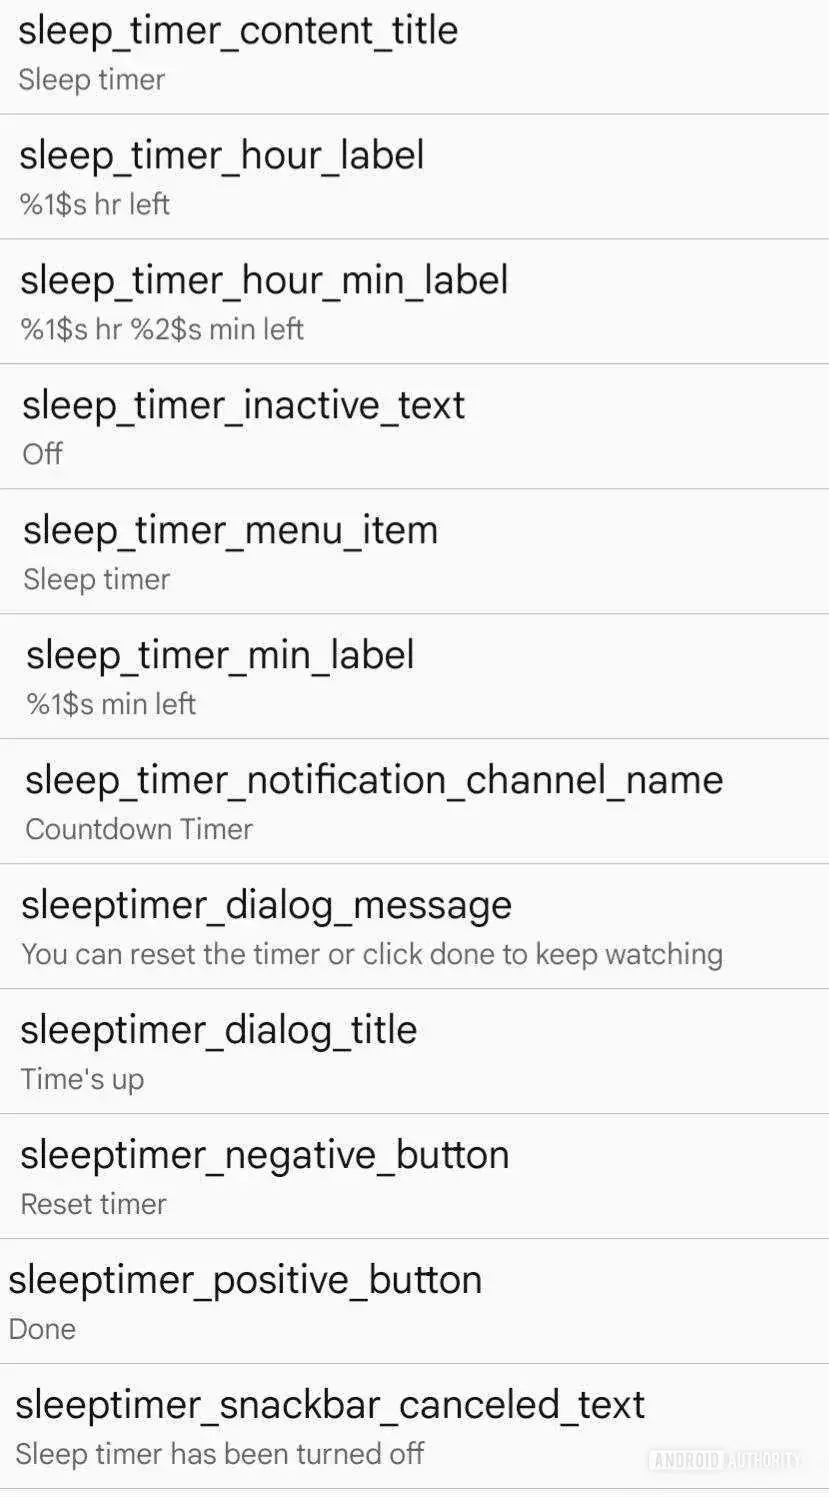 Image Source - Android Authority - The YouTube app could finally be getting a sleep timer